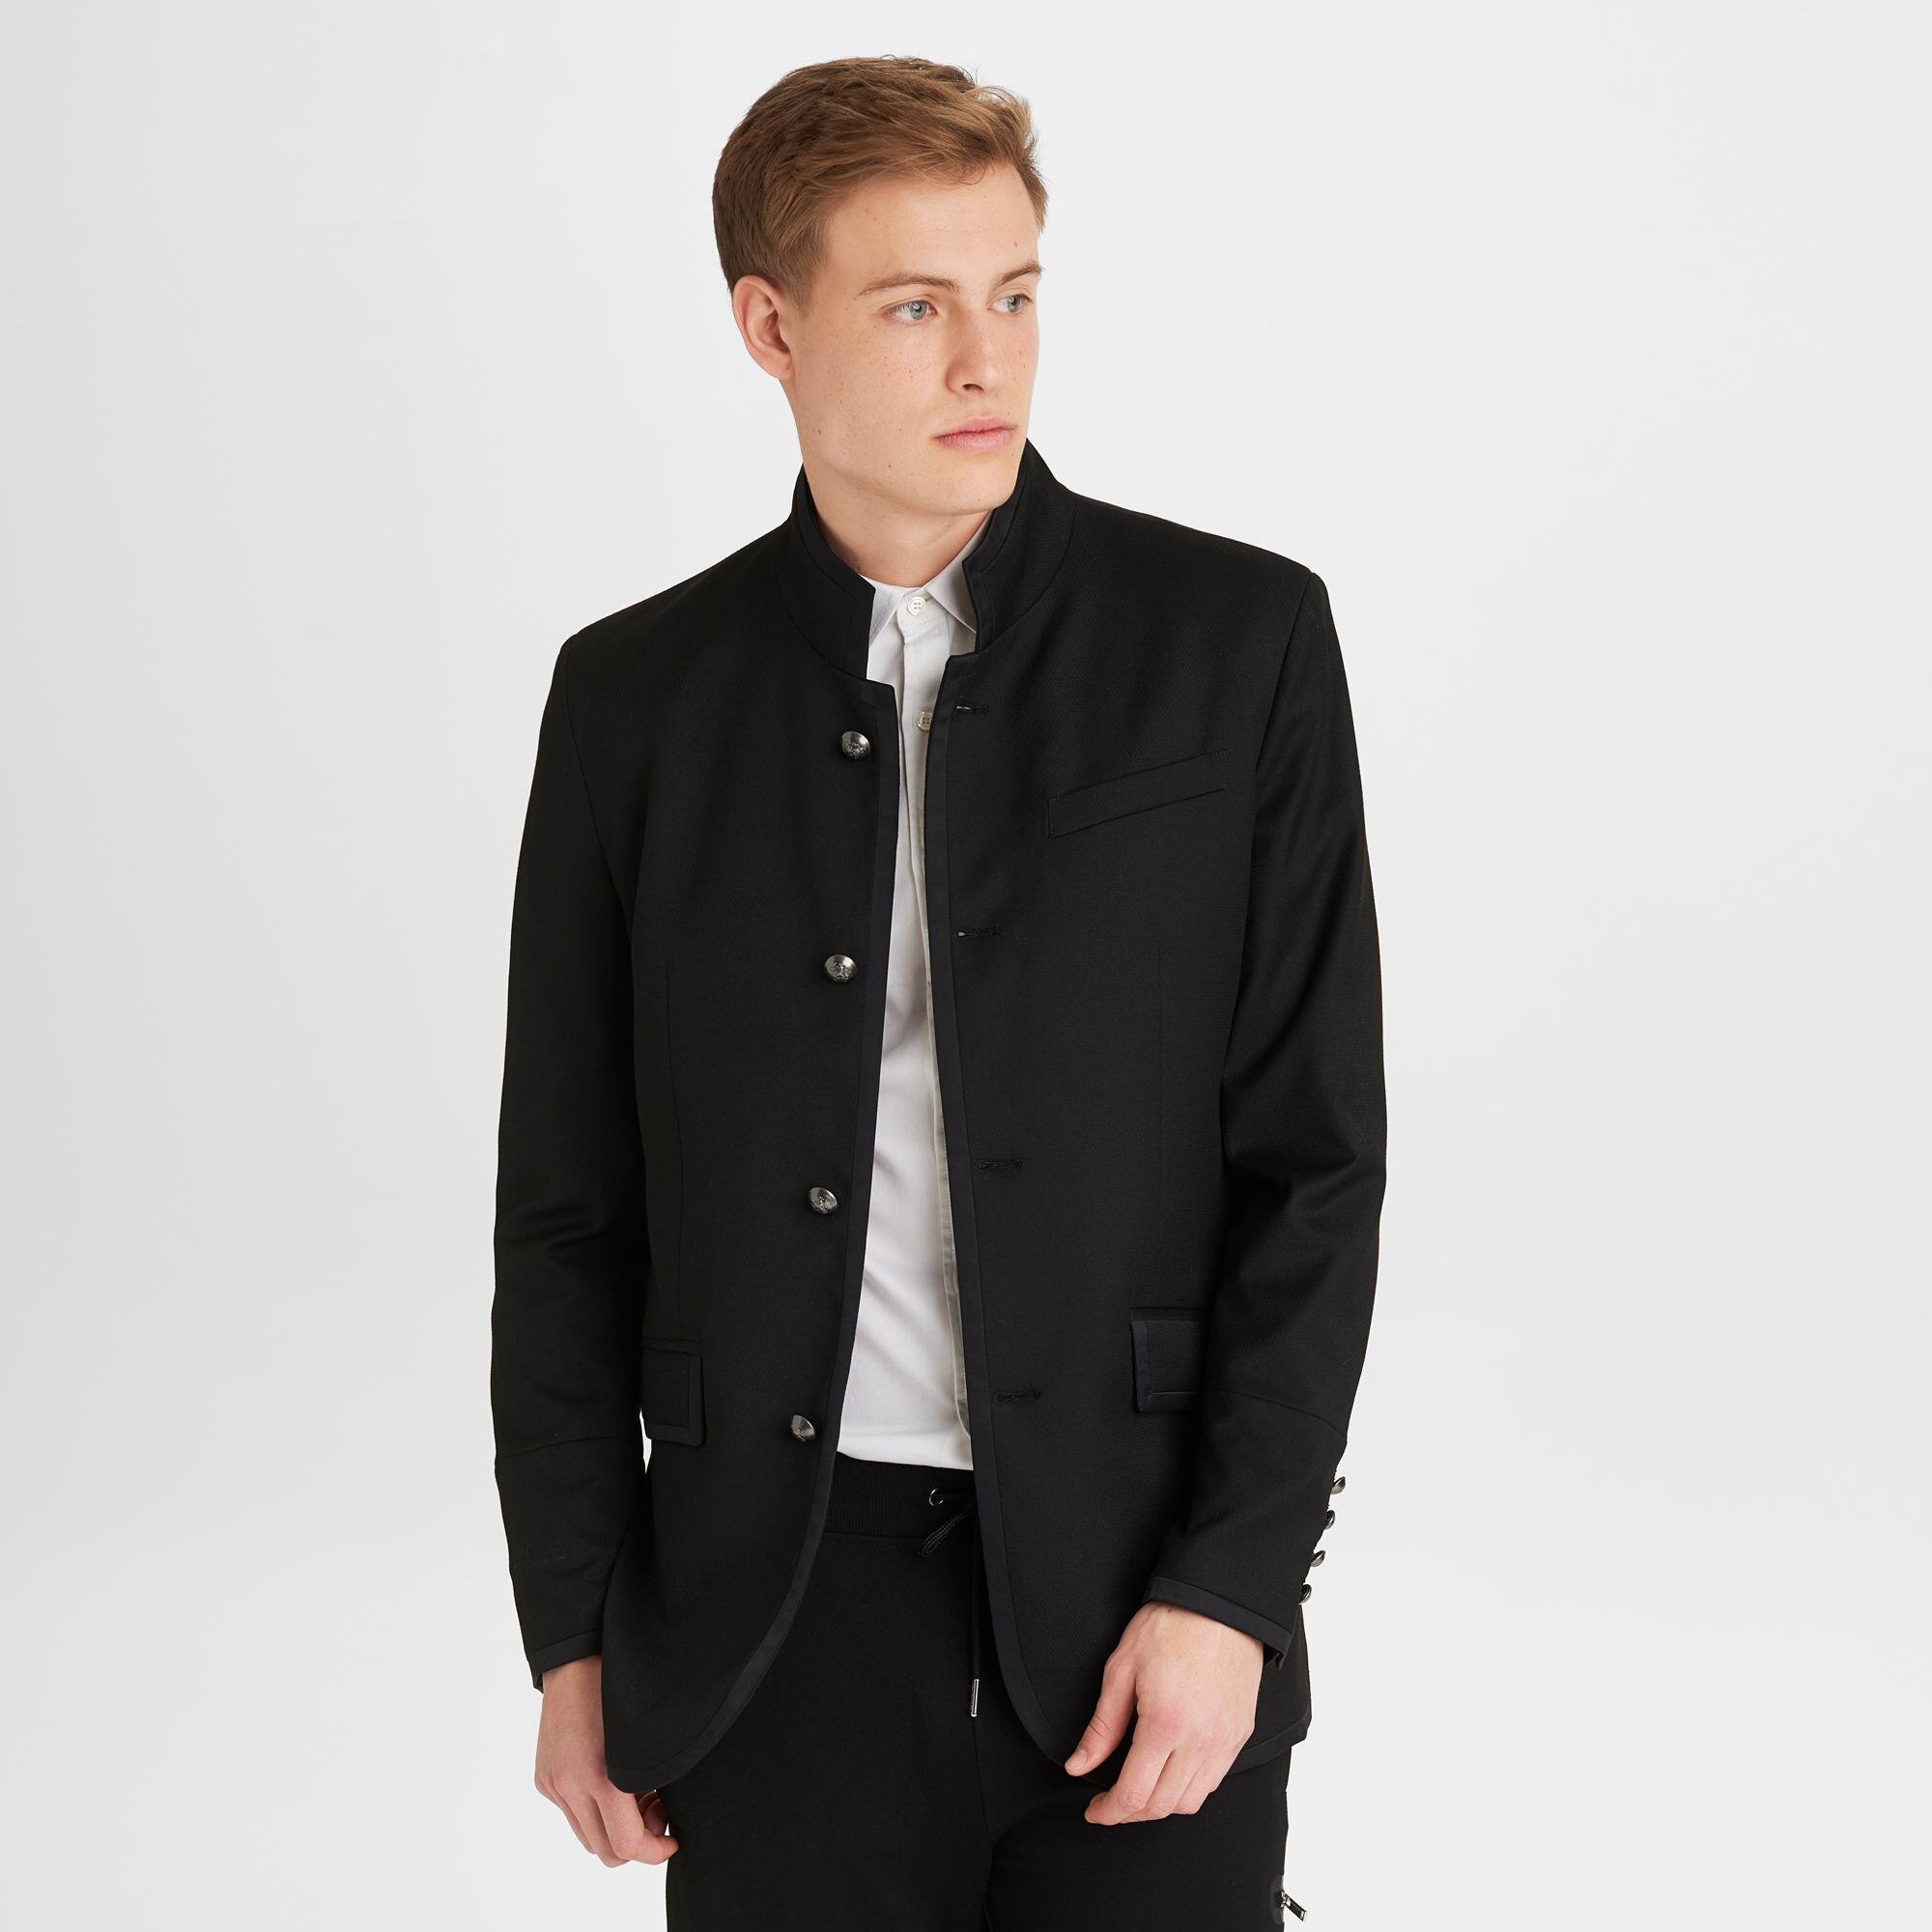 Karl Lagerfeld Synthetic Military Style Blazer in Charcoal (Black) for Men  - Lyst